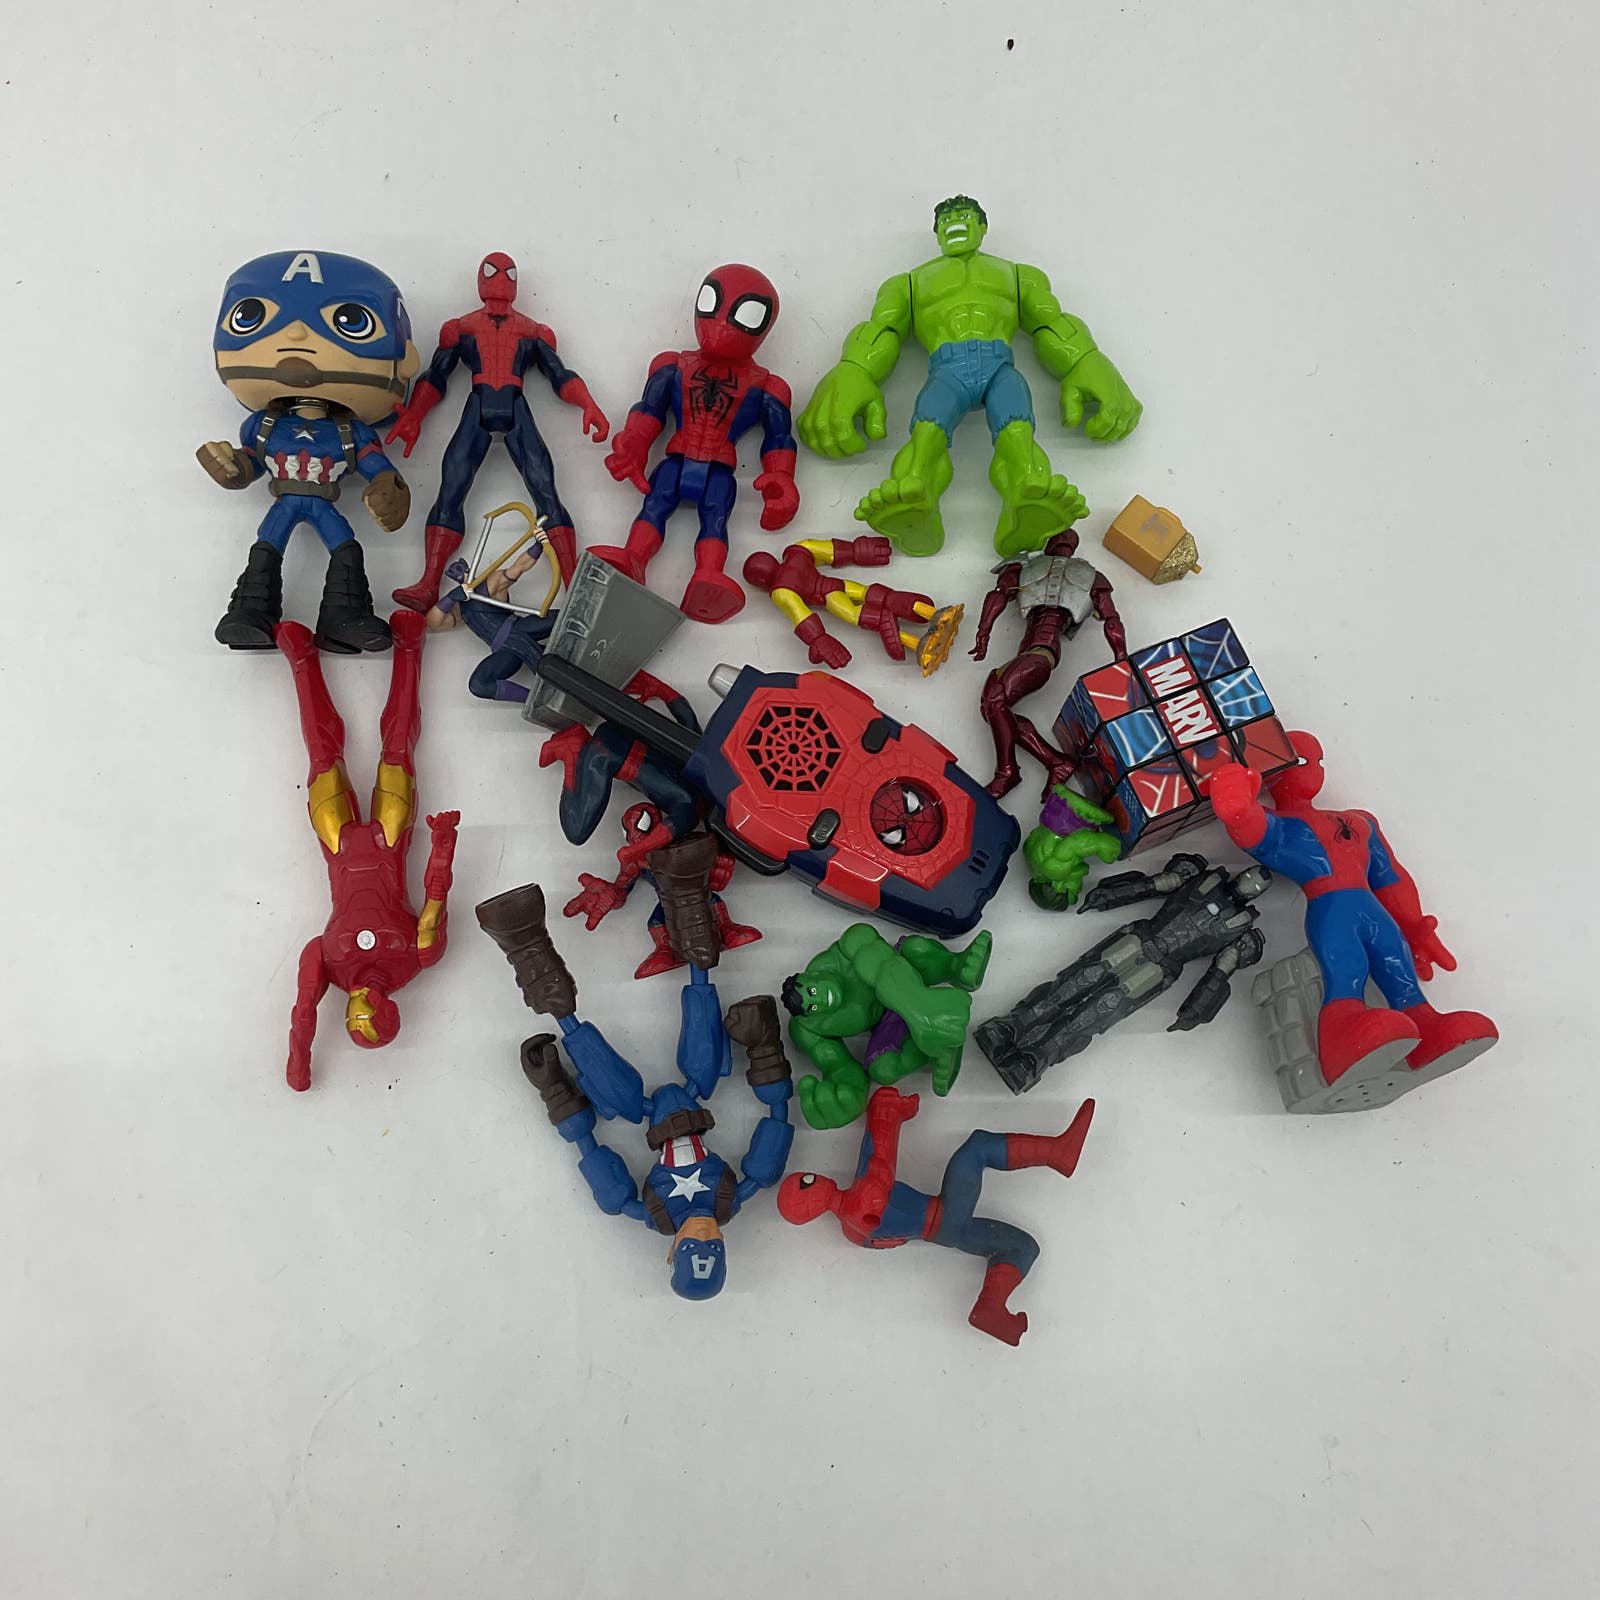 Mixed Super Hero Marvel Spiderman Avengers LOT Cake Toppers Action Figures Toys - Warehouse Toys